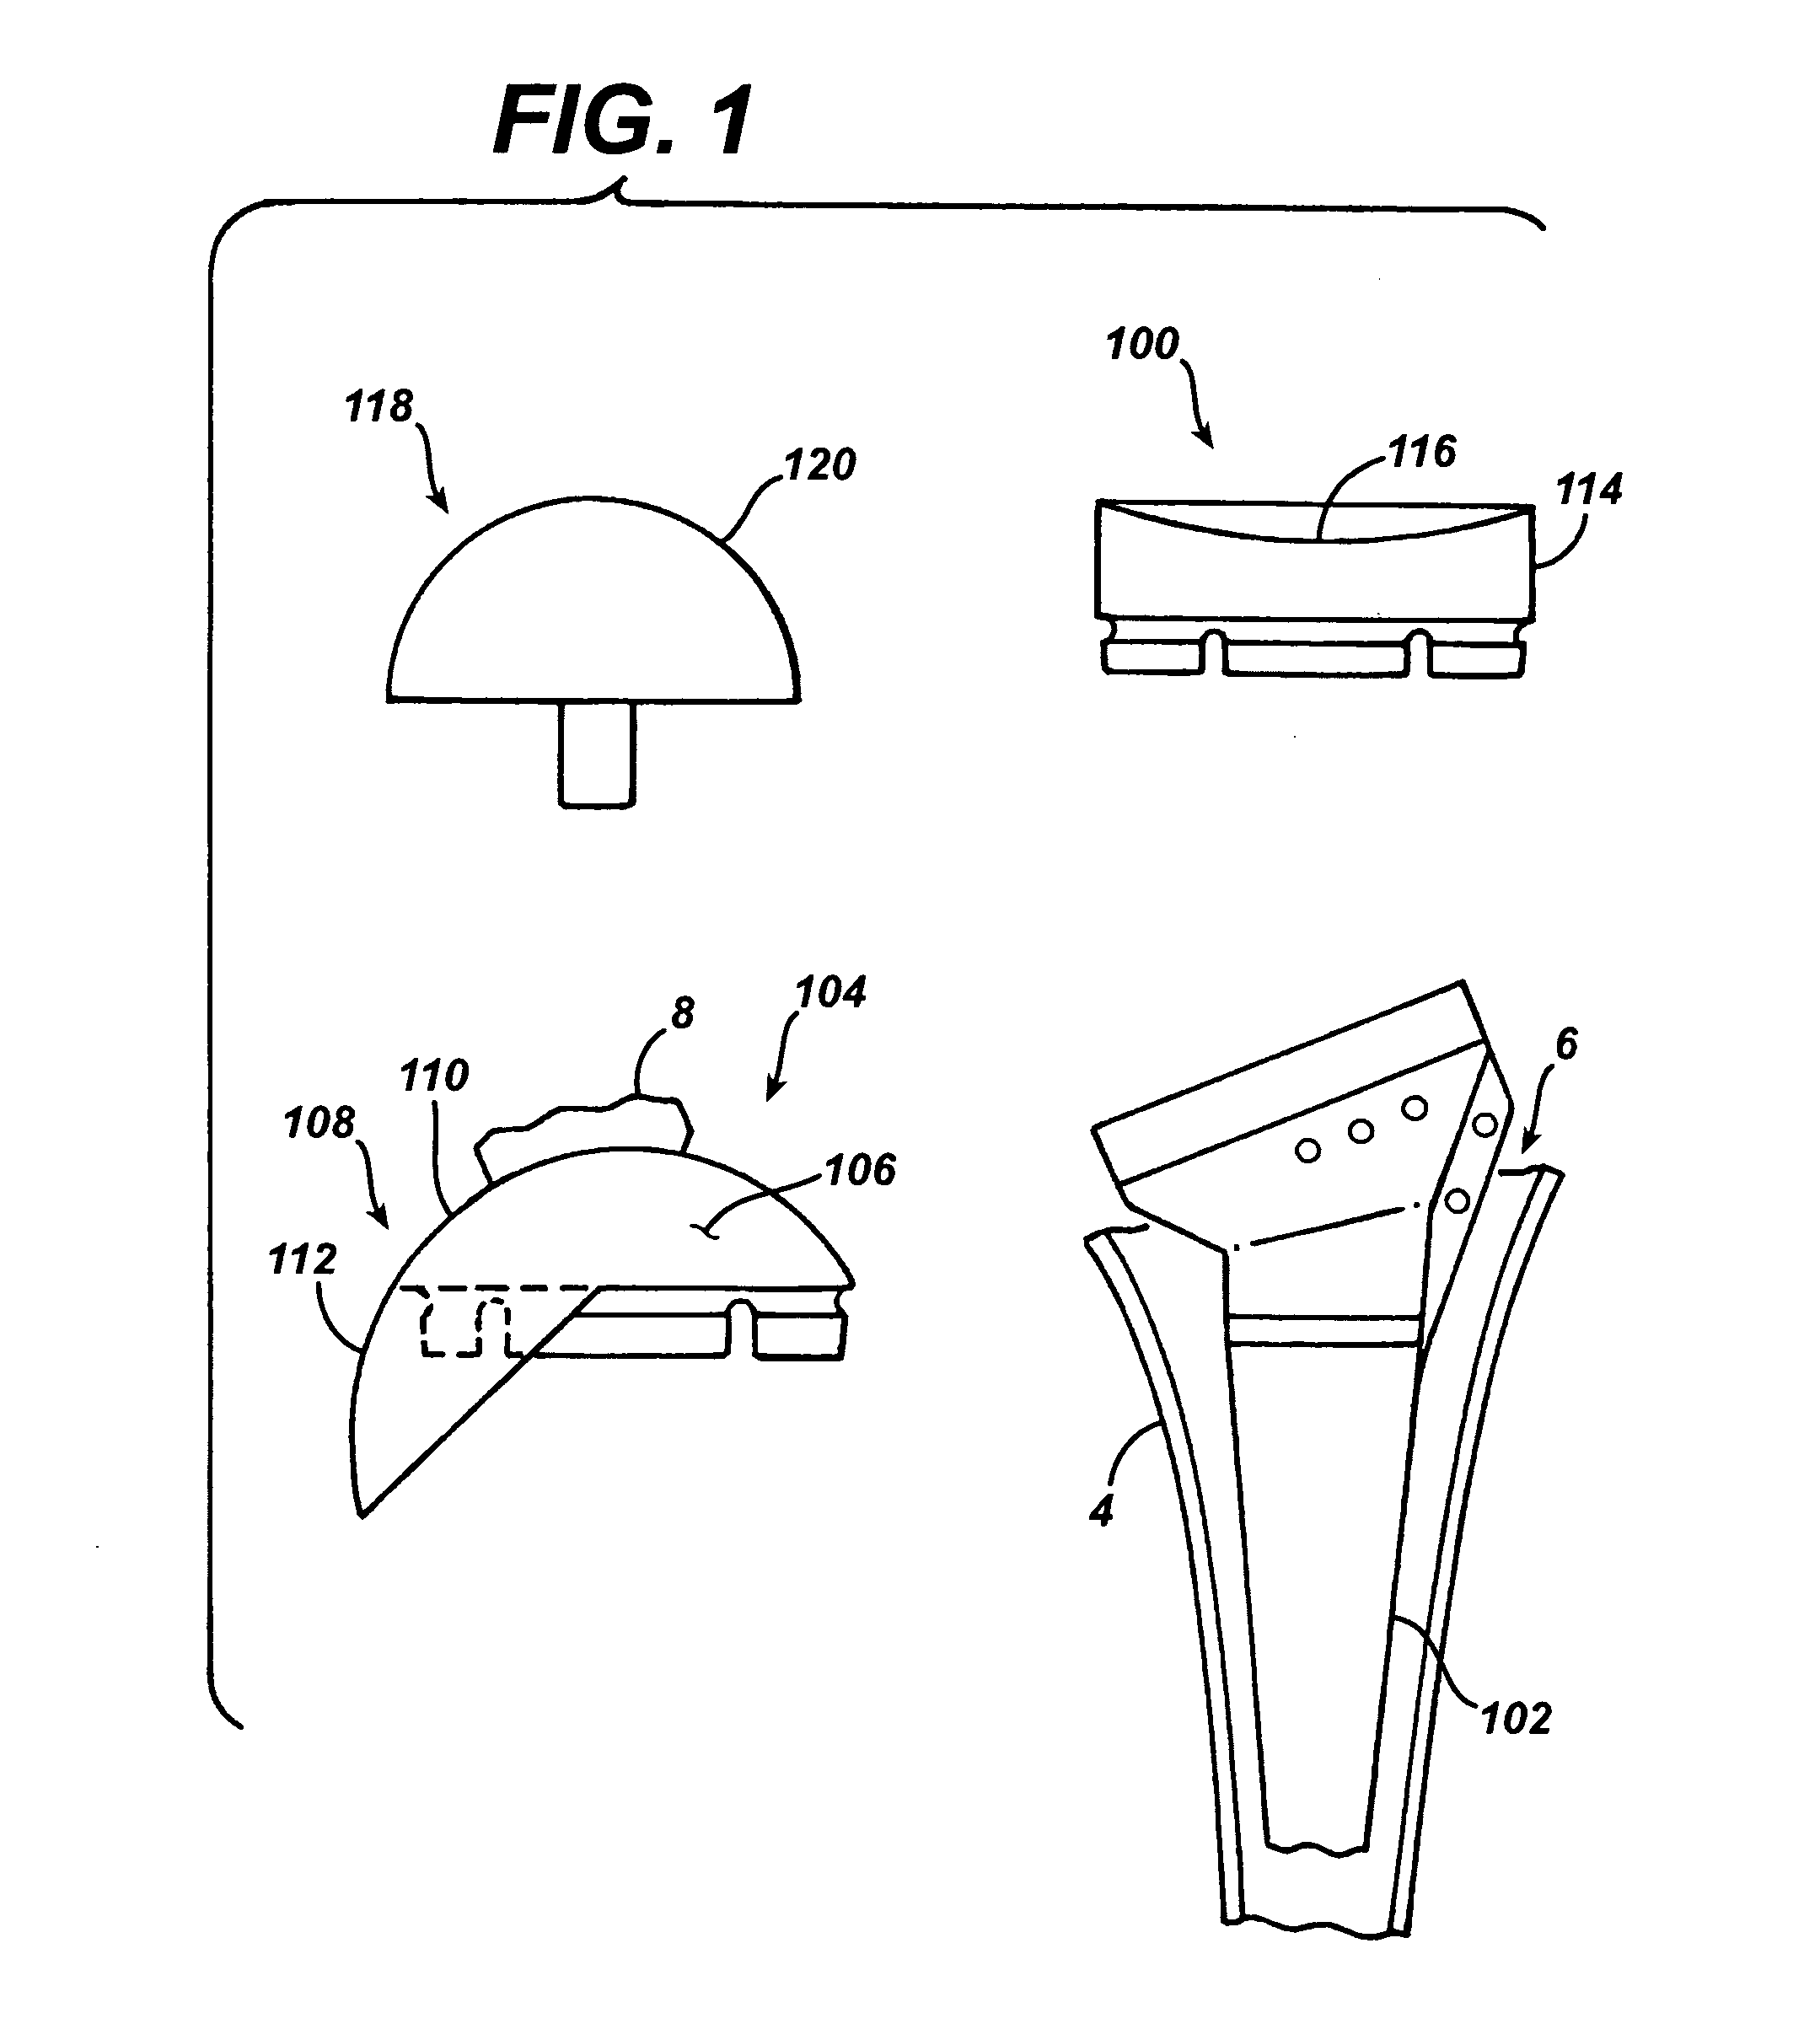 Extended articulation prosthesis adaptor and associated method